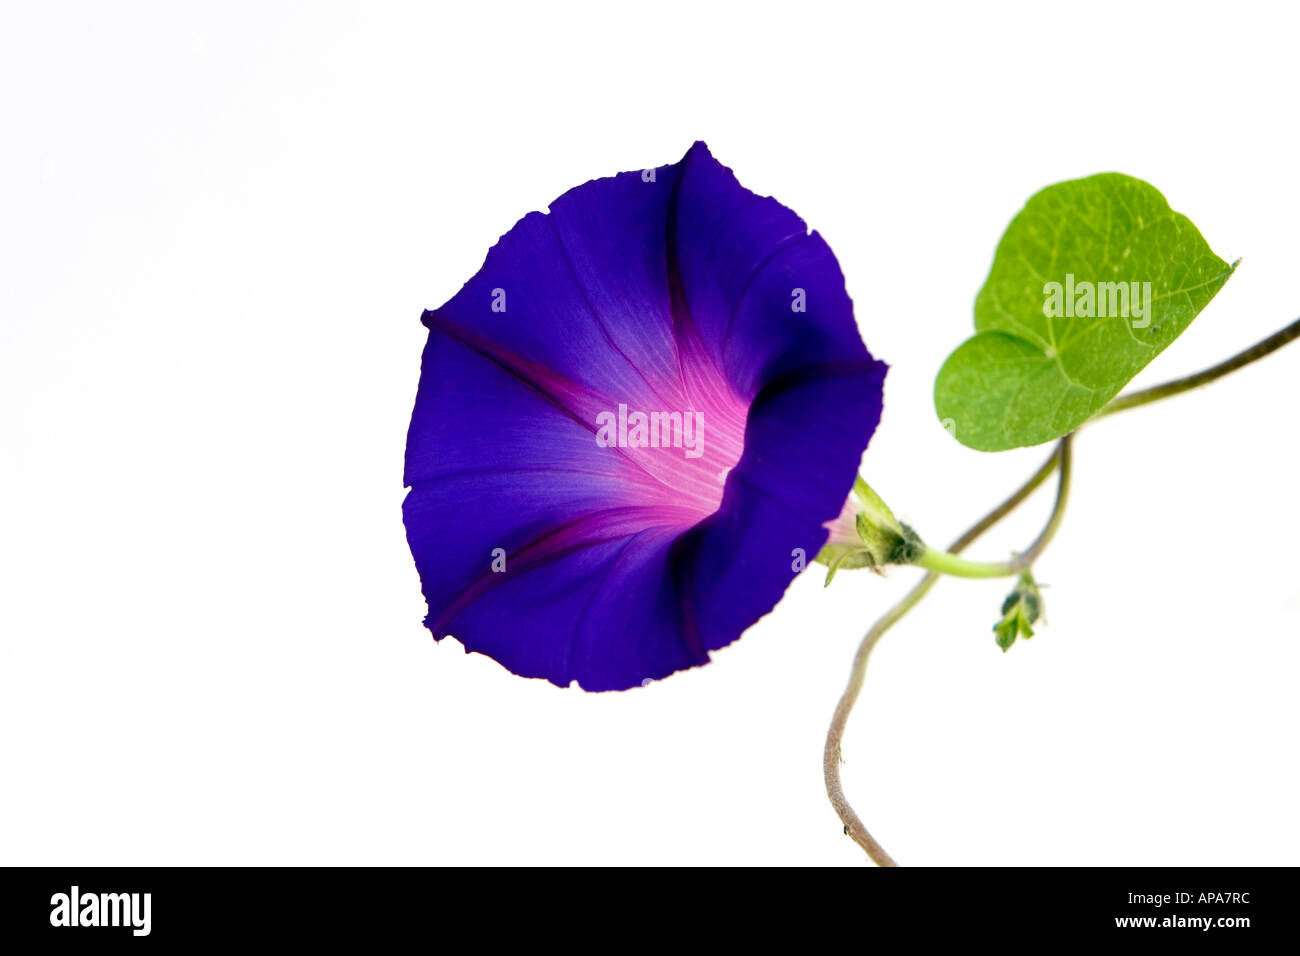 Ipomoea purpurea (Morning glory), pink flower and bud with twisted stems  Stock Photo - Alamy